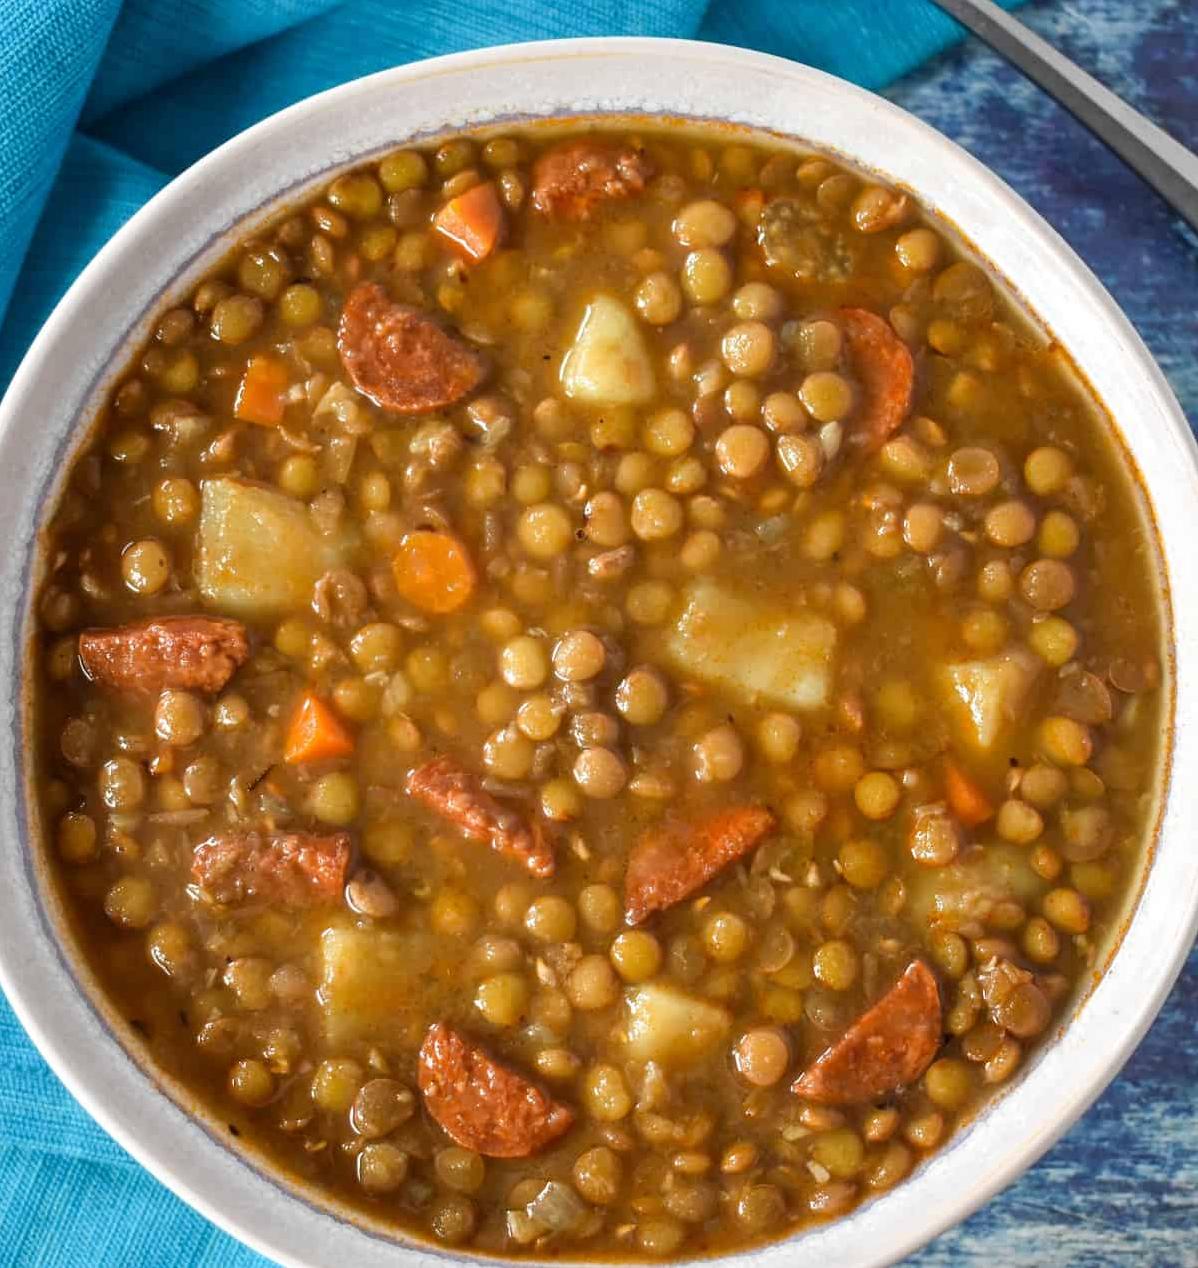  You won't be able to resist a second serving of this flavorful Basque chorizo and lentil soup.